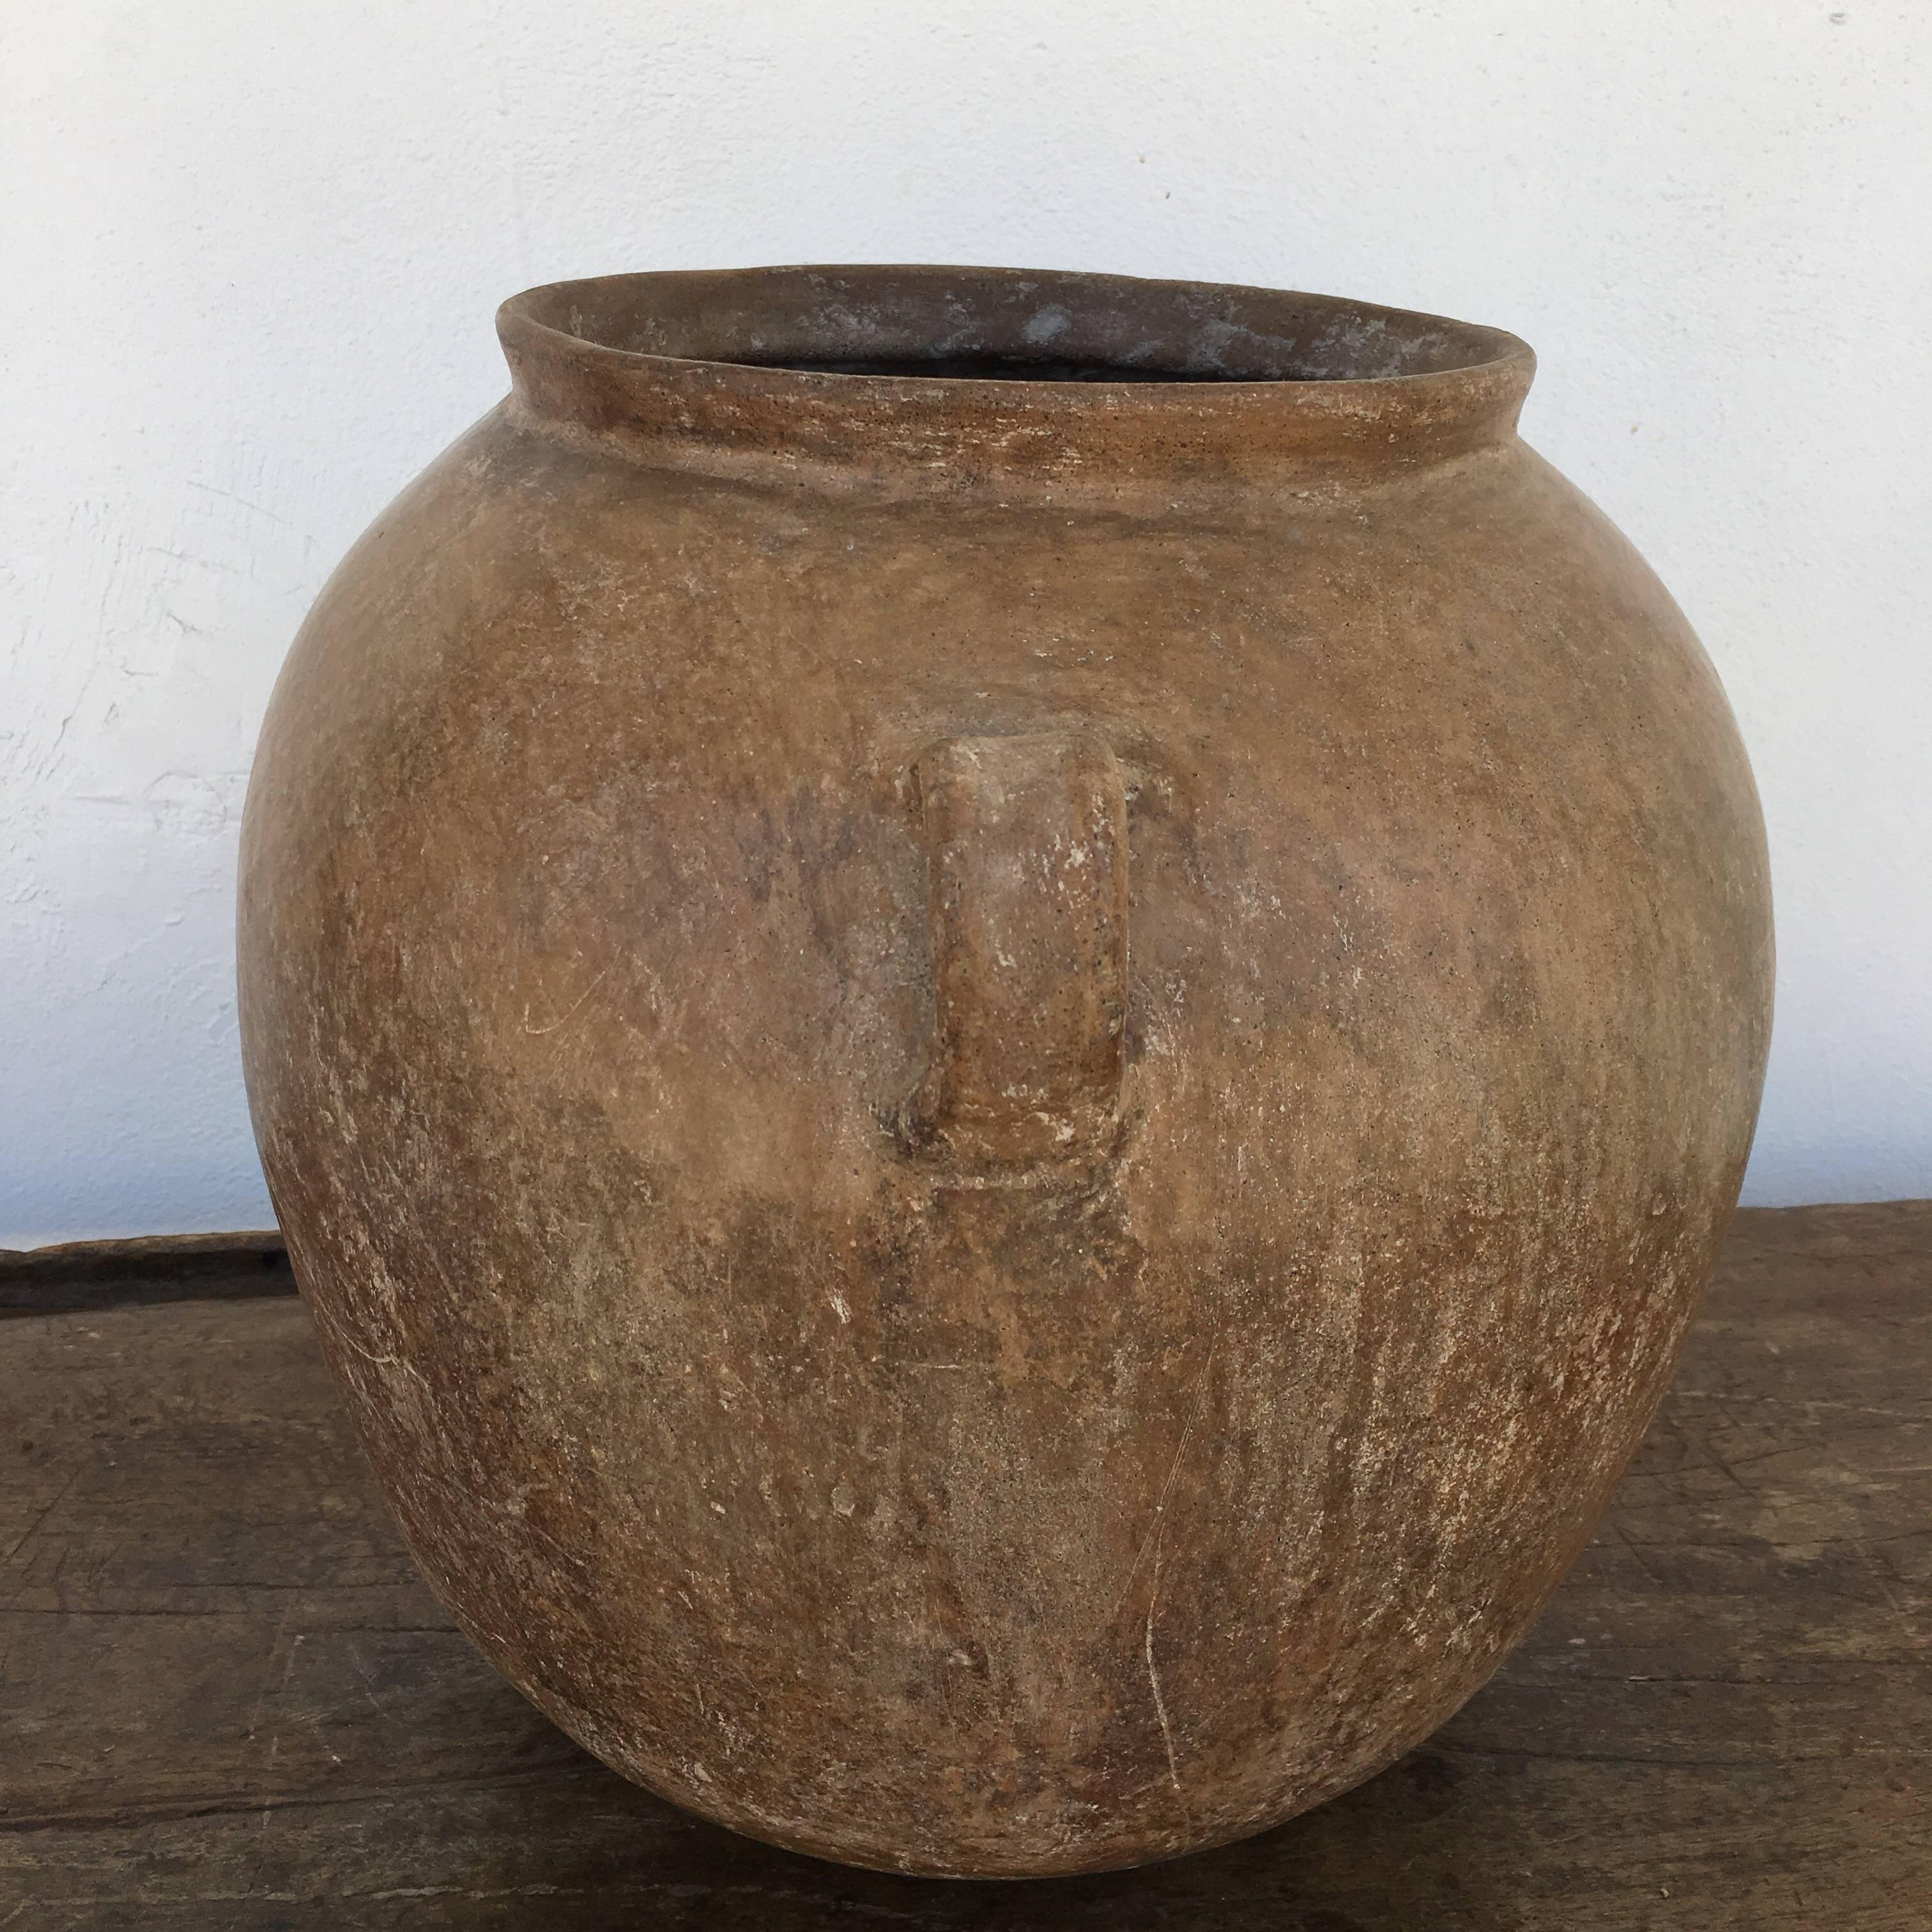 Ceramic water vessel from Los Reyes Metzontla, Puebla, 1980s. Popoloca culture of central Mexico. It has taken approximately 6 years to obtain these one of a kind pieces. There are no roads leading to the communities that continue using this